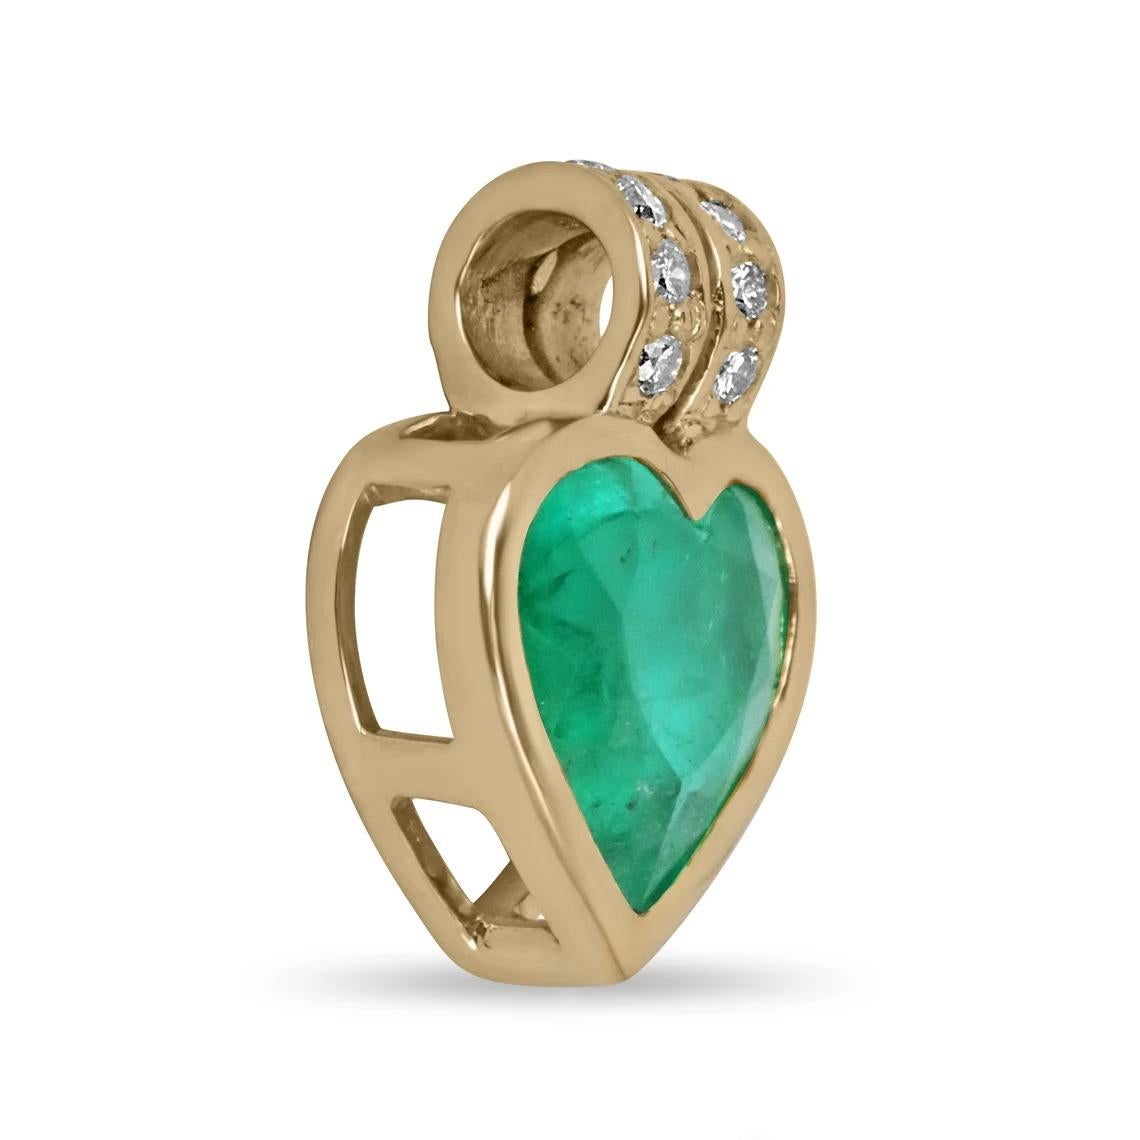 A fancy heart-shaped emerald and diamond pendant. This exquisite, high-quality piece features an eye-catching heart-cut Colombian emerald that is almost six carats. A gemstone of this cut and size is rare to come across, mostly for how remarkable